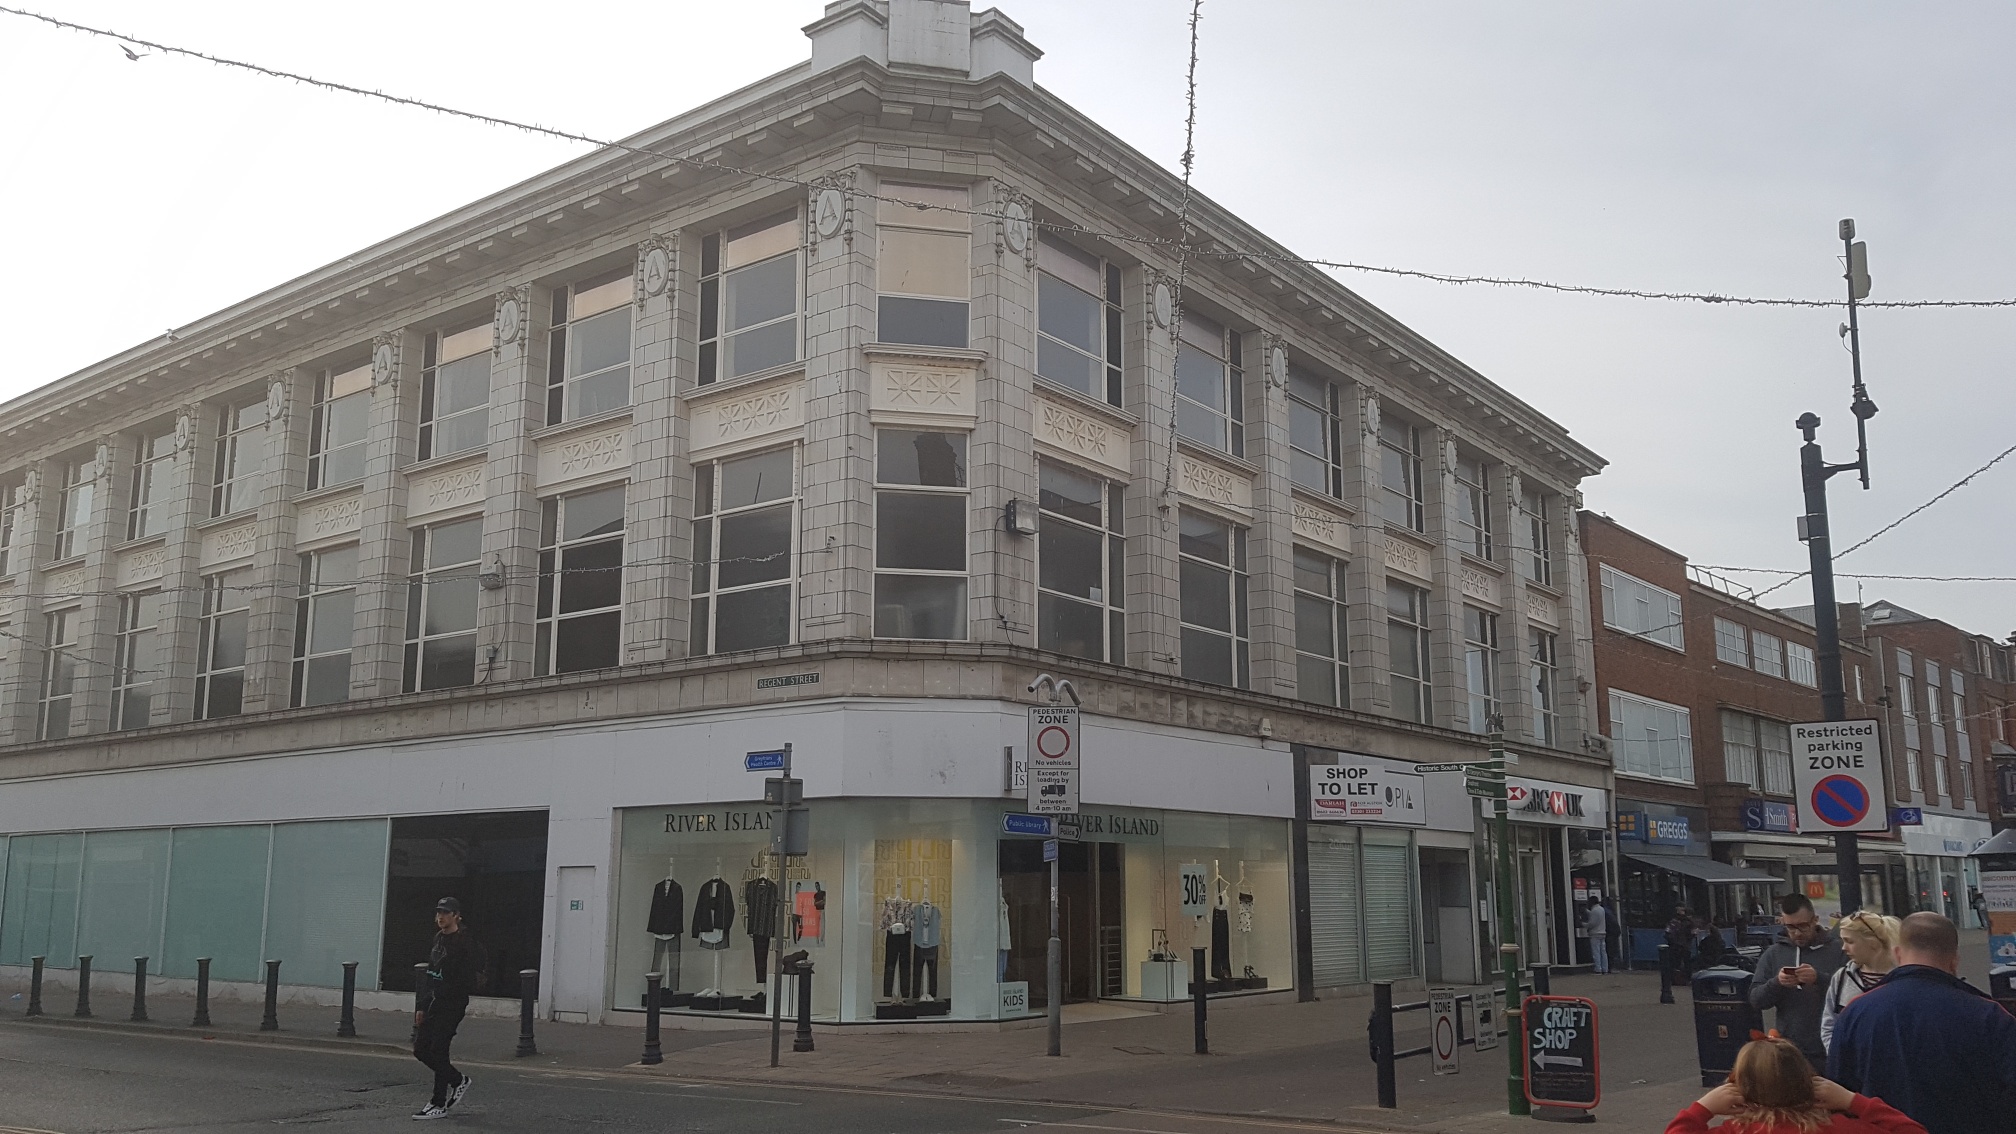 Select - Shop - Fashion in GREAT YARMOUTH, Great Yarmouth - Great Yarmouth